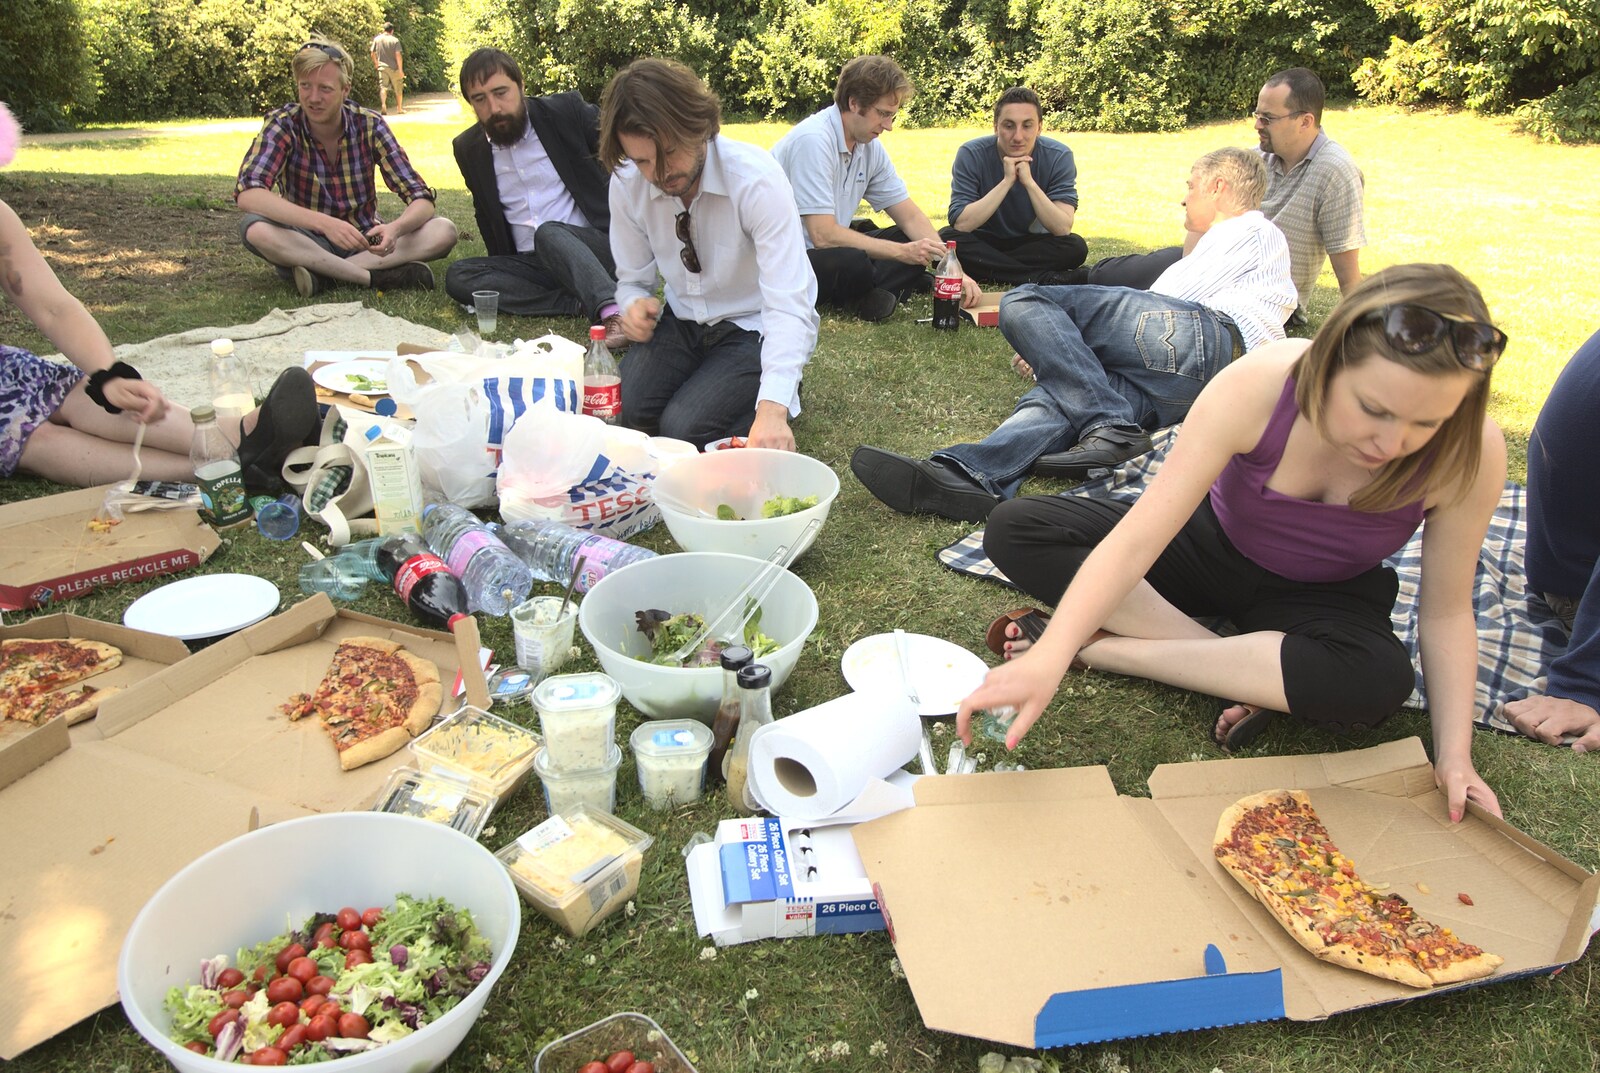 A Taptu Science Park Picnic, and Wedding Guests Arrive, Cambridge and Brome, Suffolk - 1st July 2010: Pizza in a box